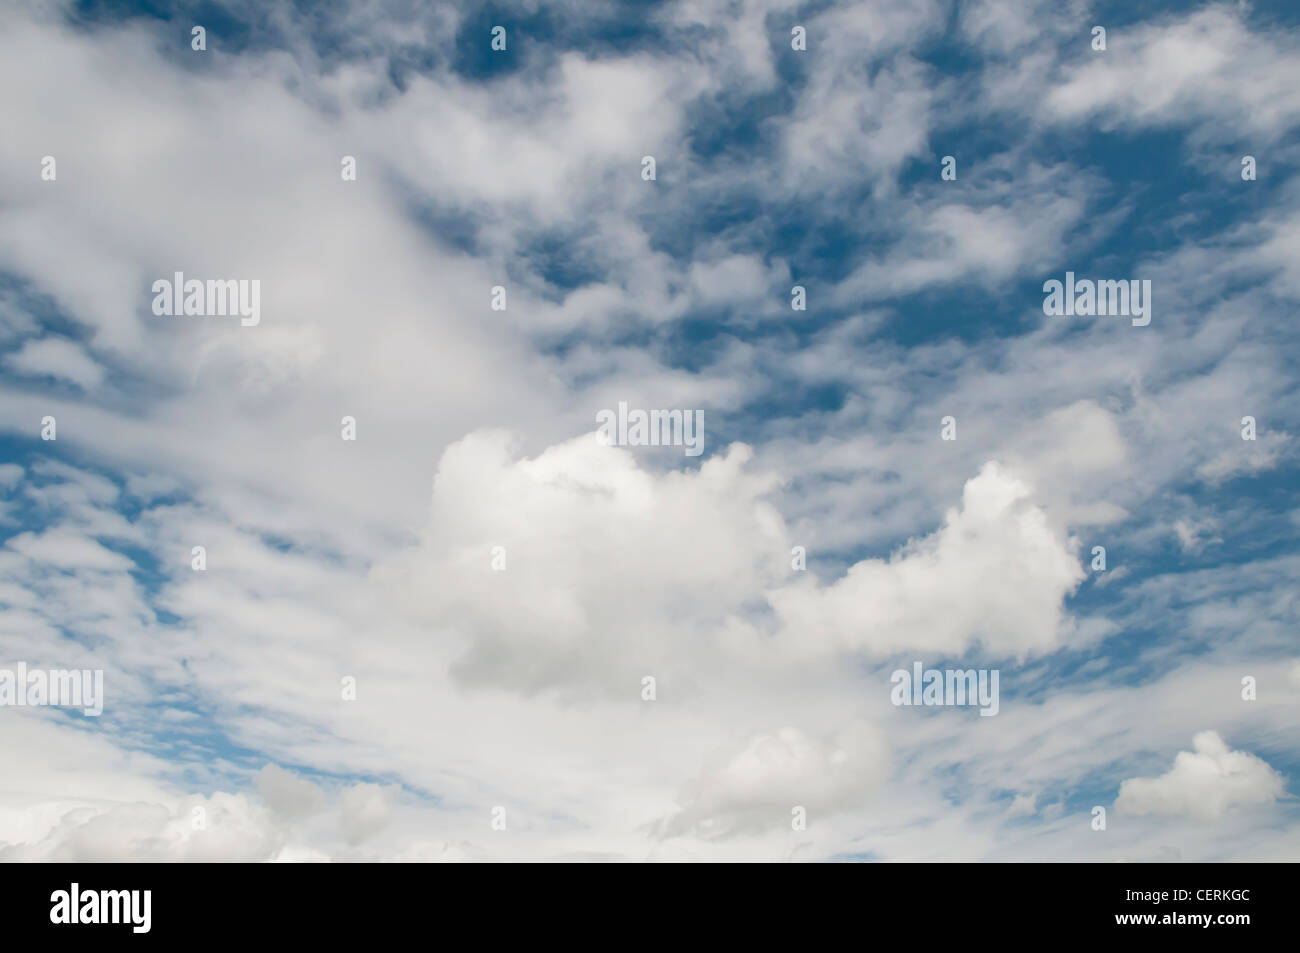 Blue sky with fluffy white clouds Stock Photo